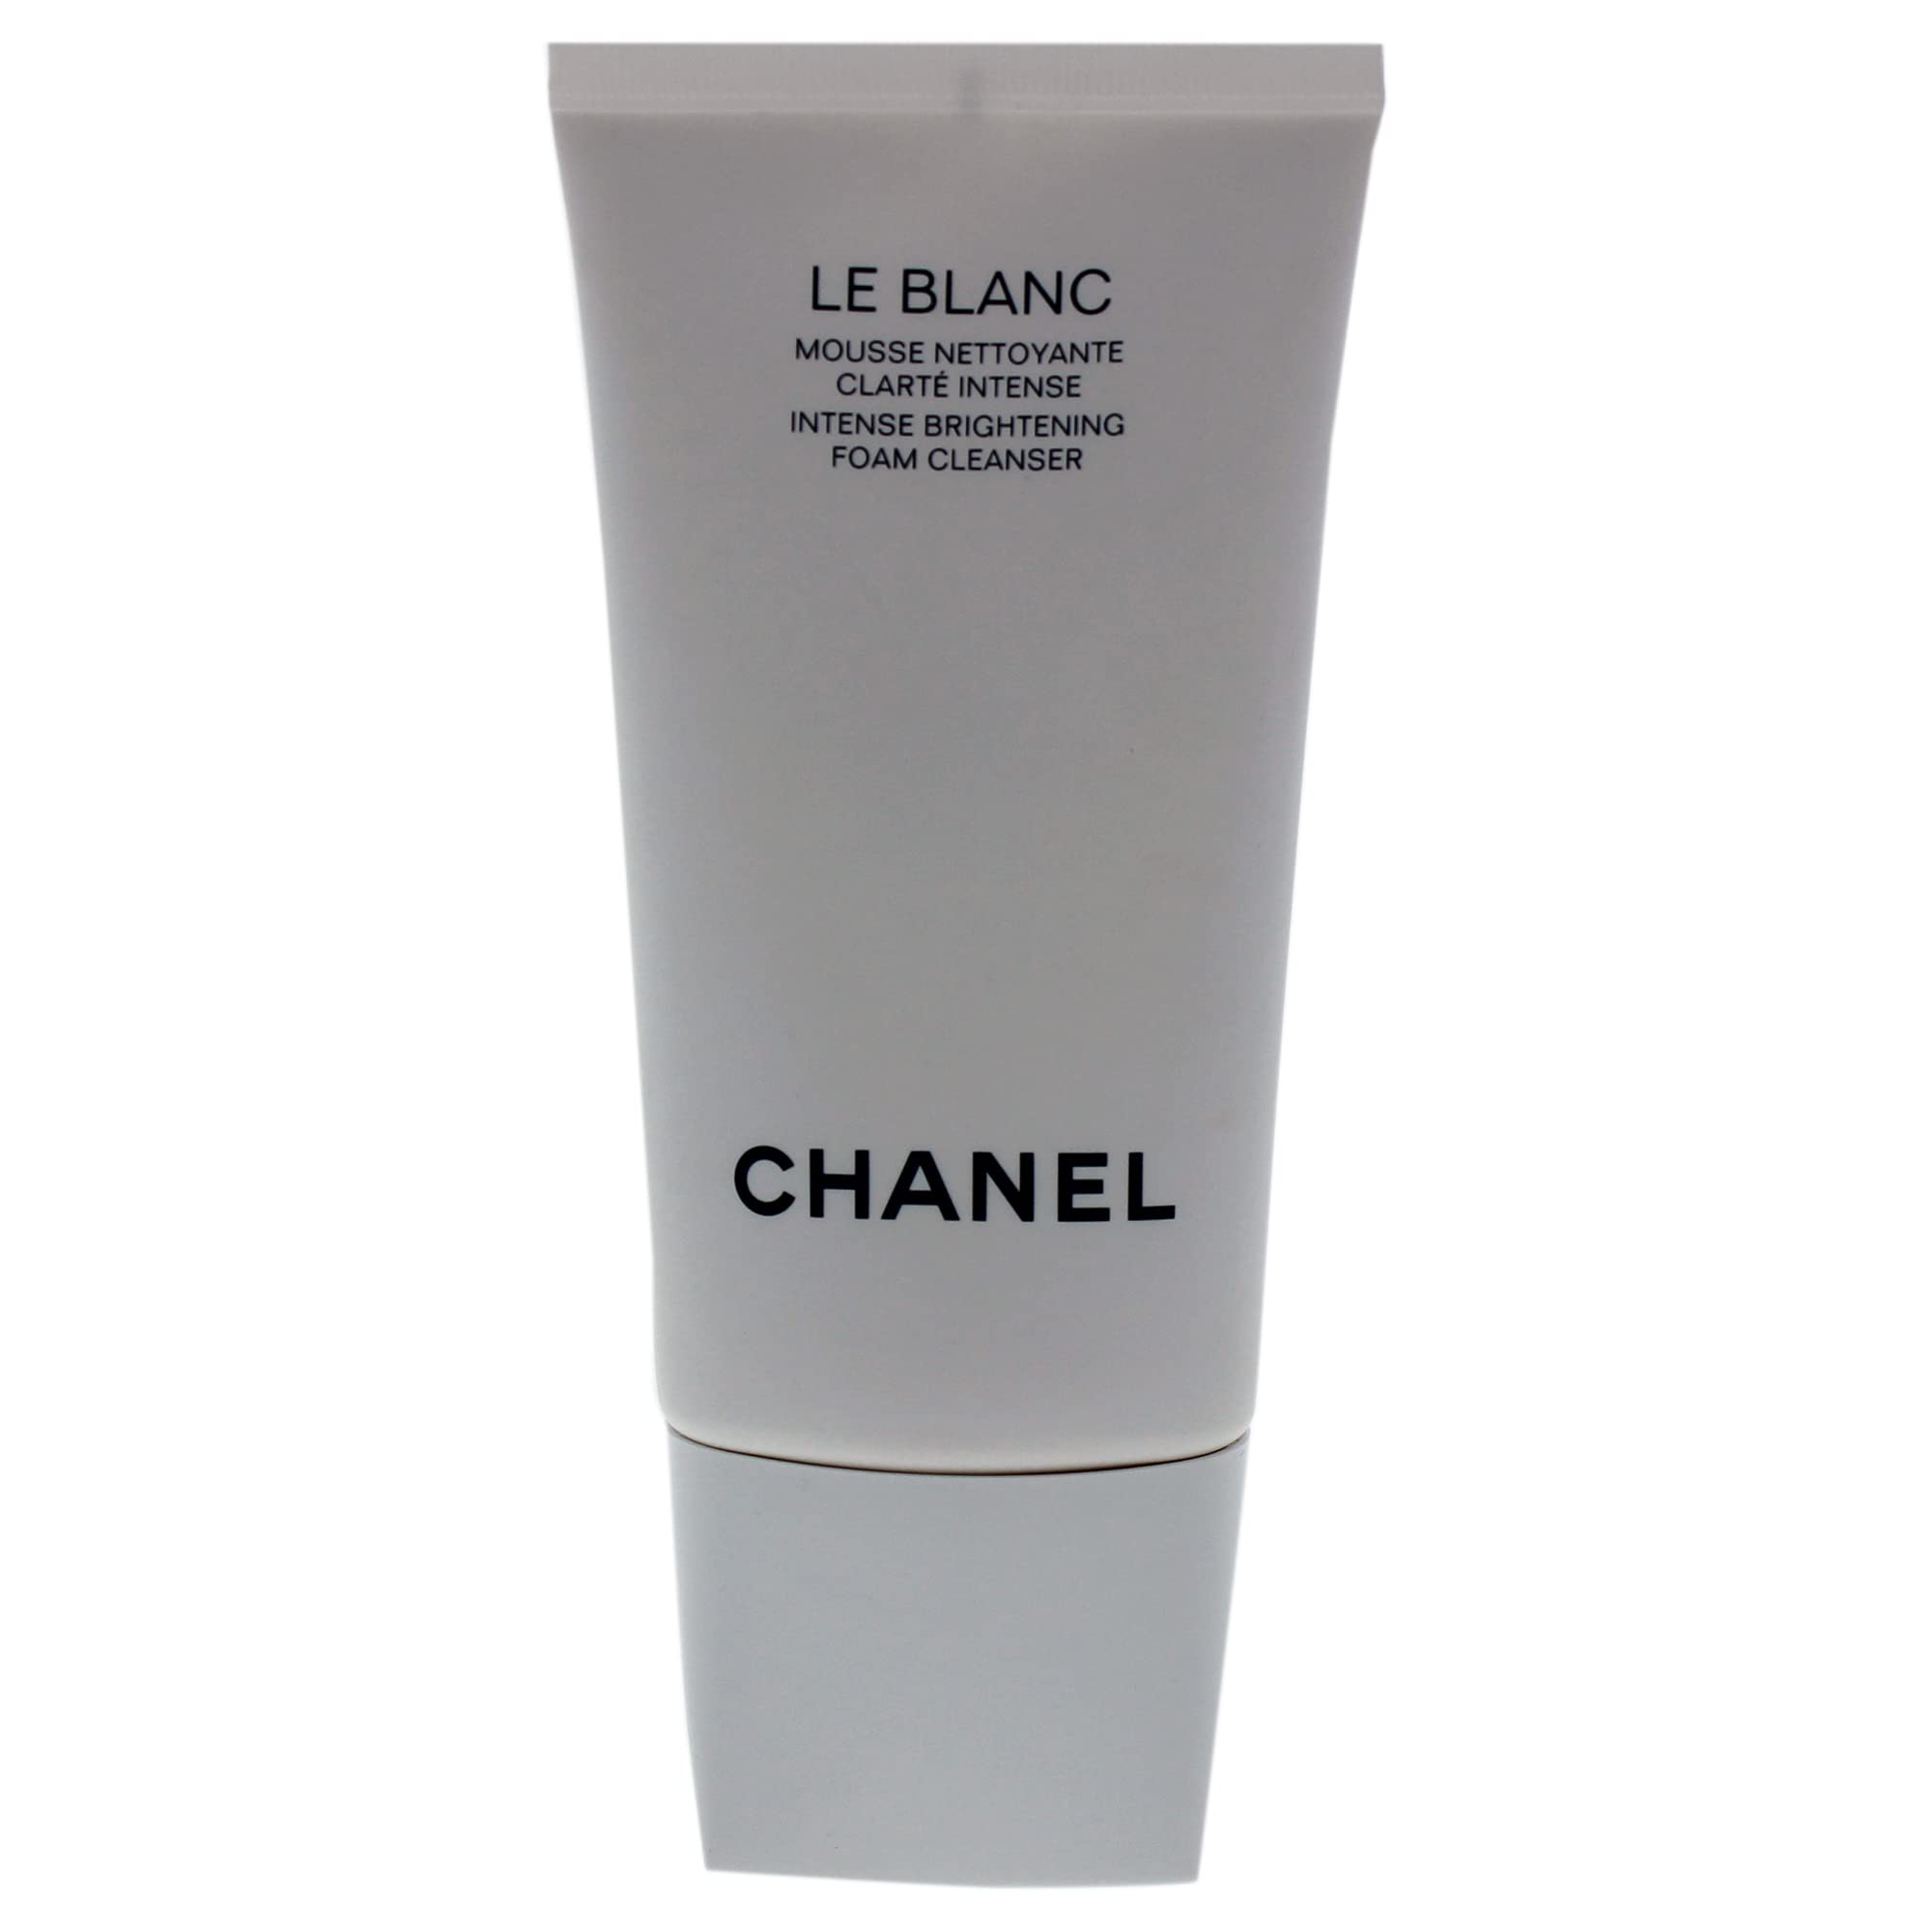 Chanel La Mousse Cleanser Review  The Luxe Minimalist  Foam cleanser  Cleanser Oil free cleanser